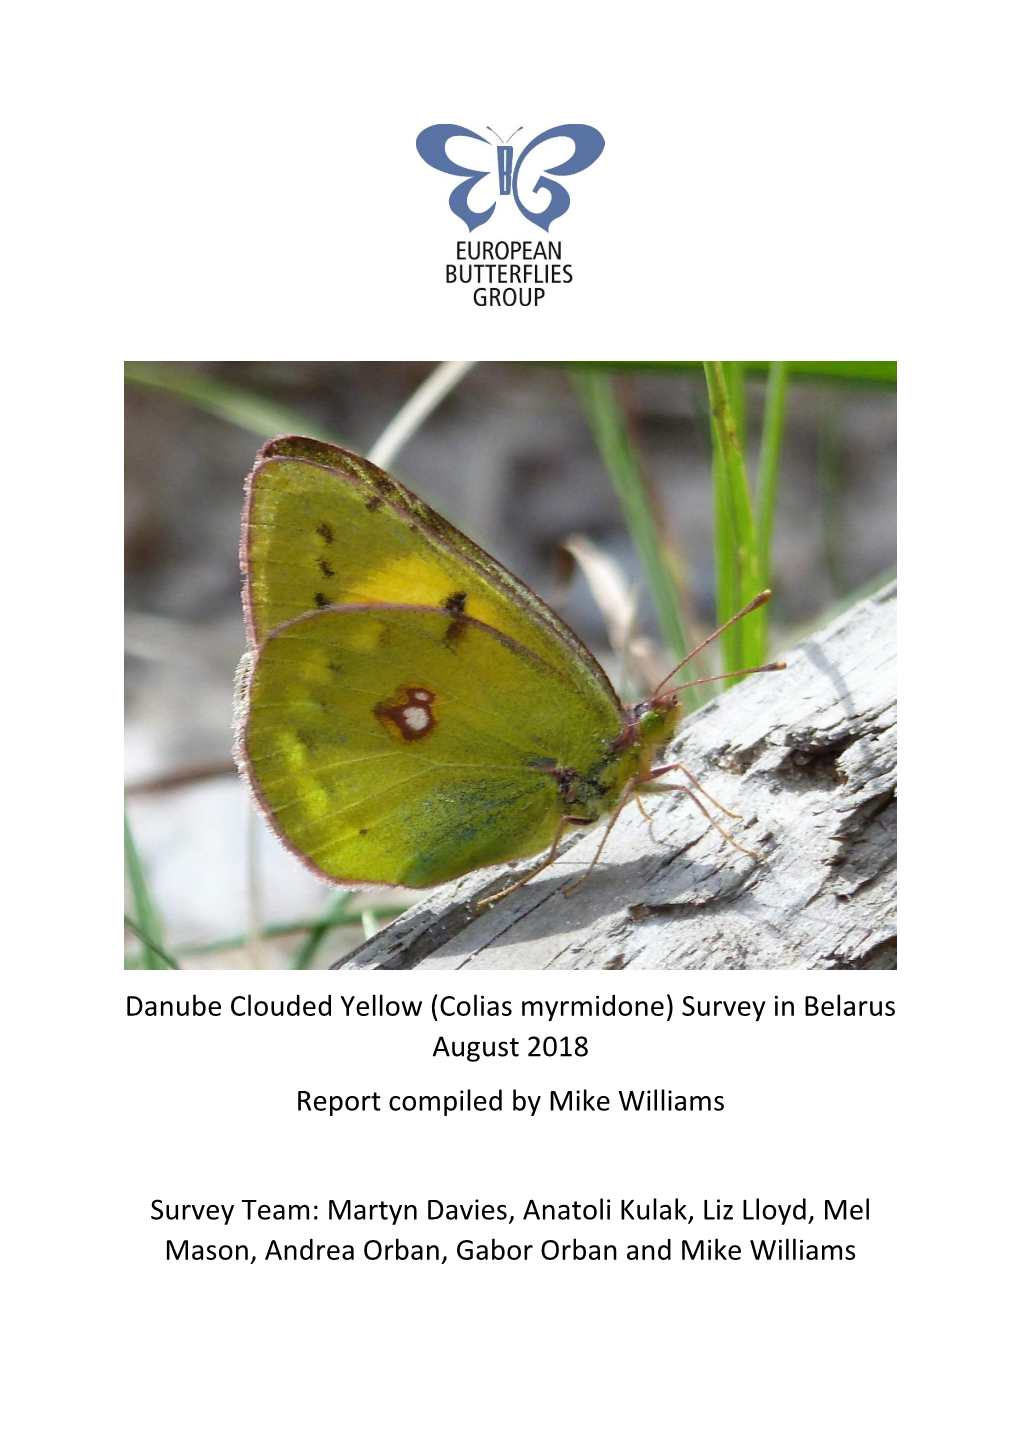 Danube Clouded Yellow (Colias Myrmidone) Survey in Belarus August 2018 Report Compiled by Mike Williams